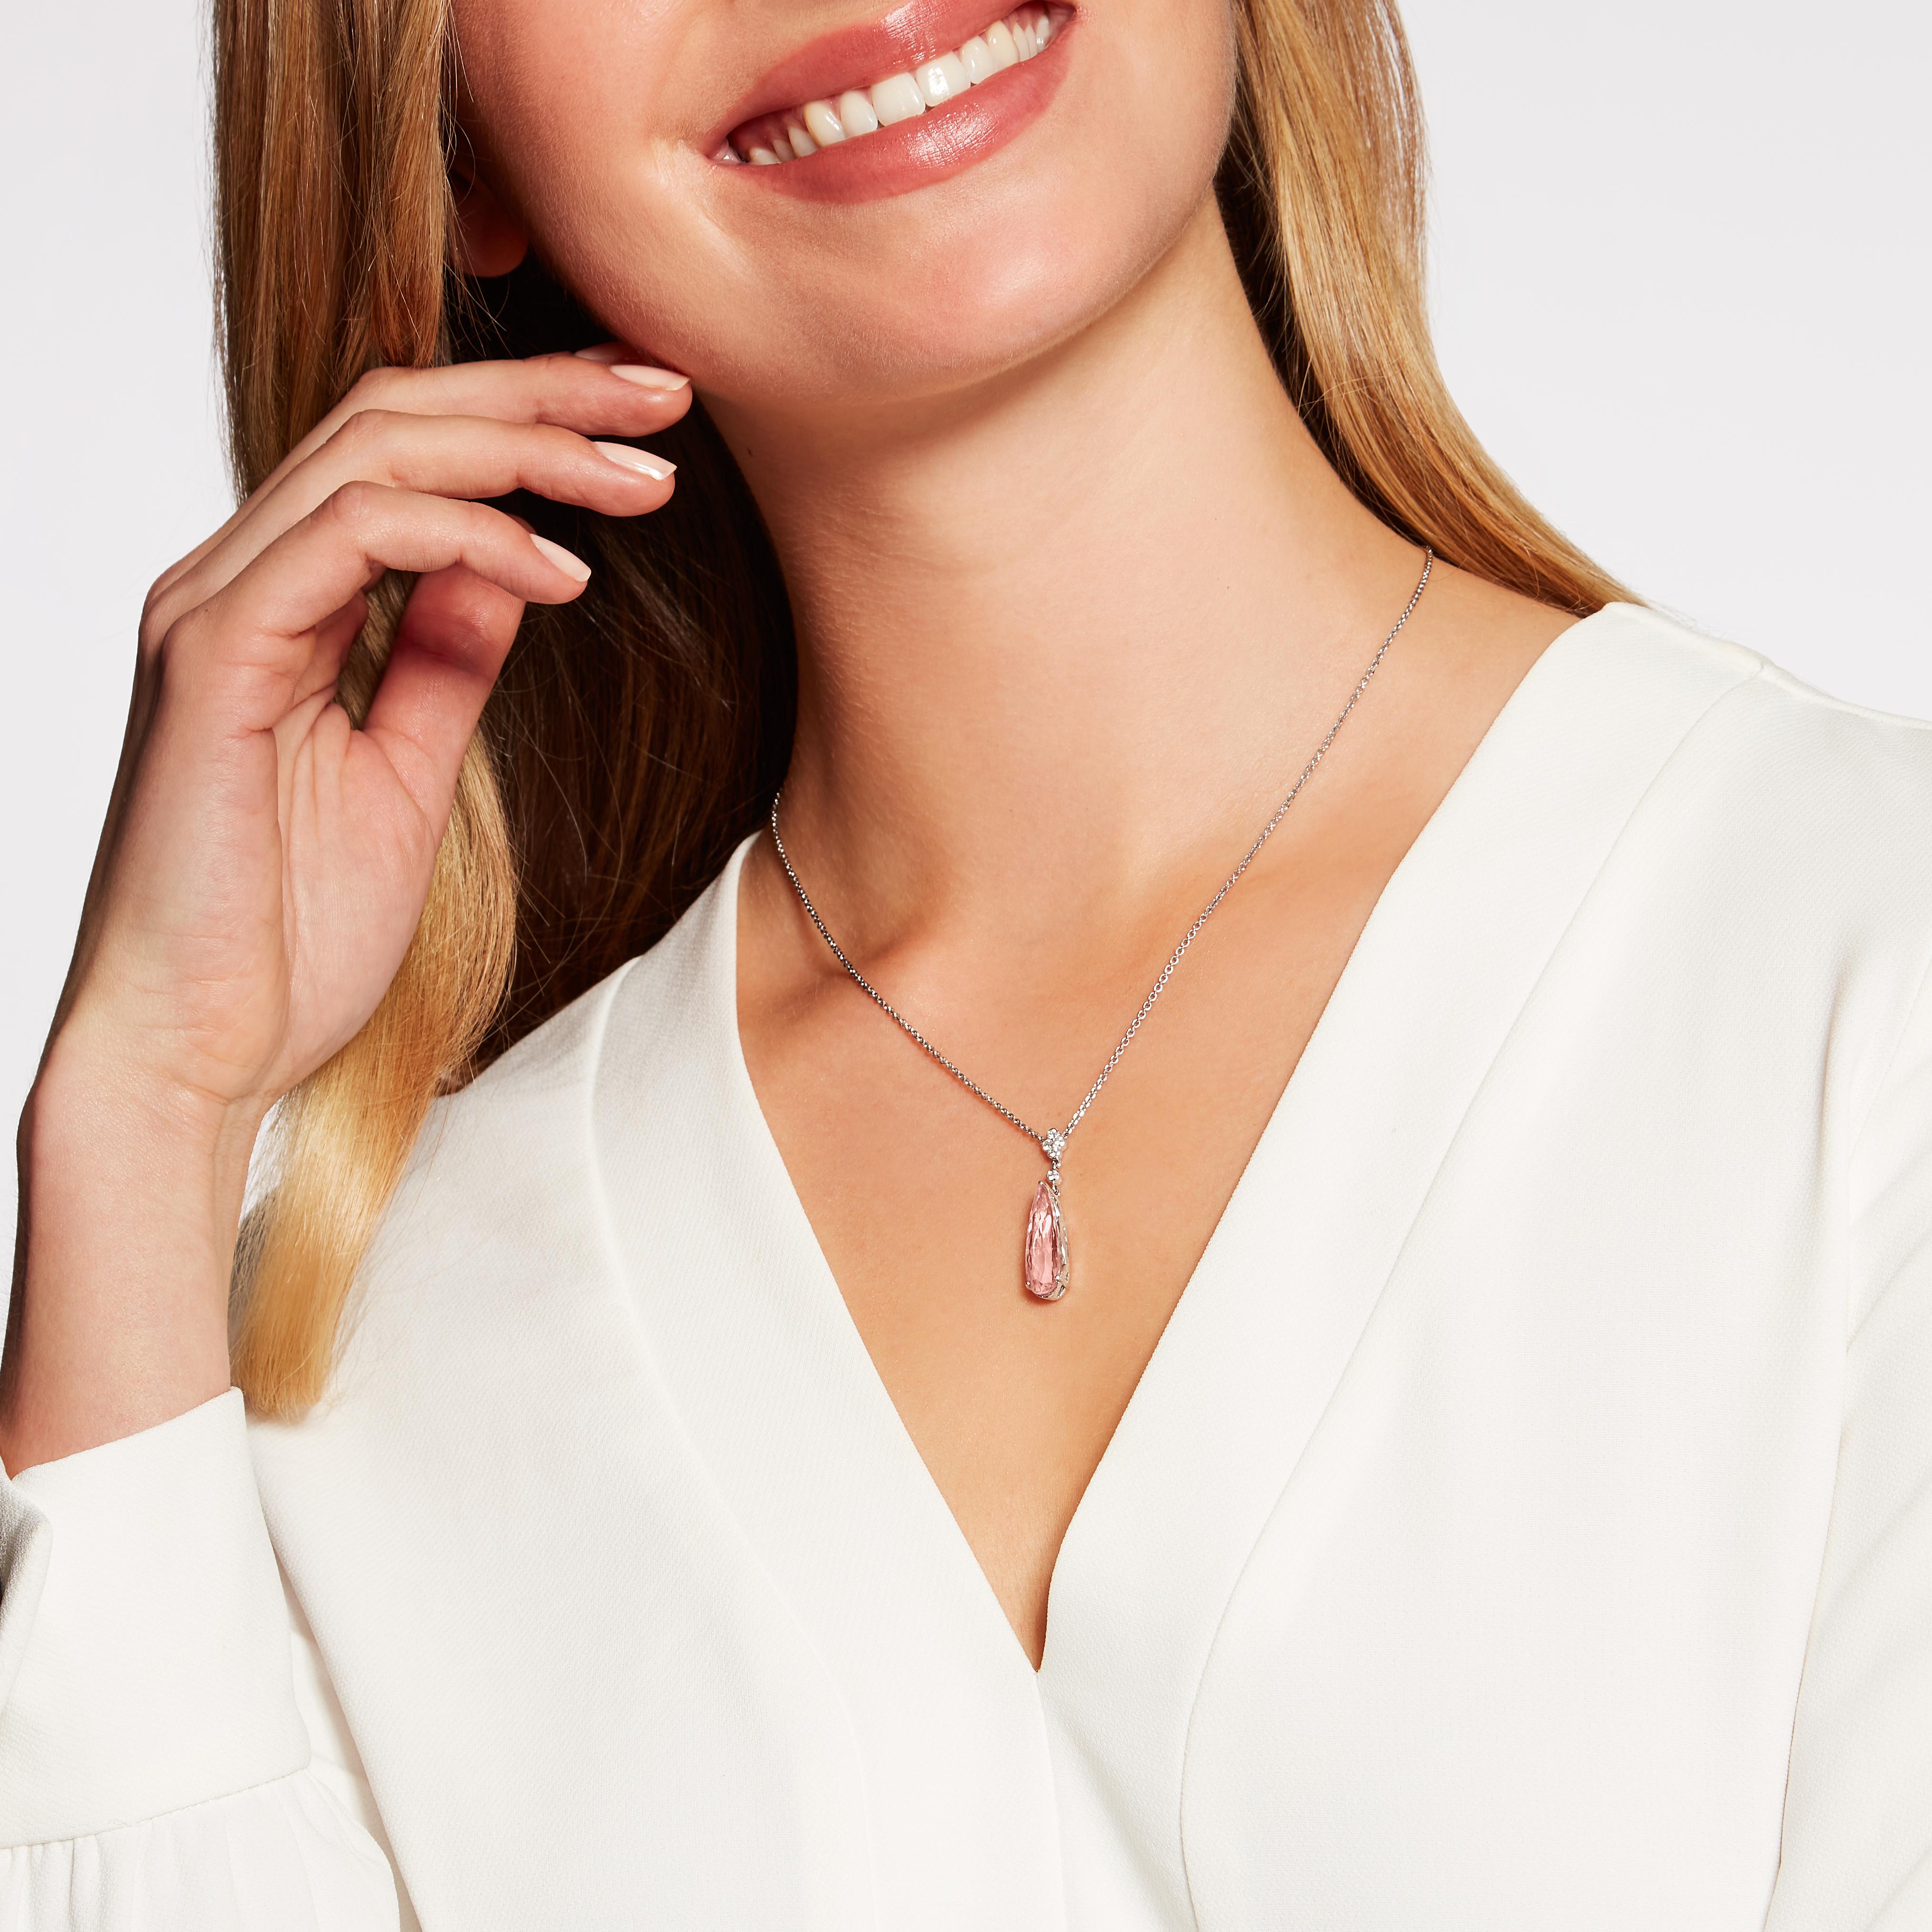 A stunning 4.93 carat pear shape Kunzite set below a diamond top in the Hirsh Chatsworth setting. This beautiful pendant is handmade in London in platinum with a total diamond weight of 0.12 carats. 

Formed deep within the earth and found on every